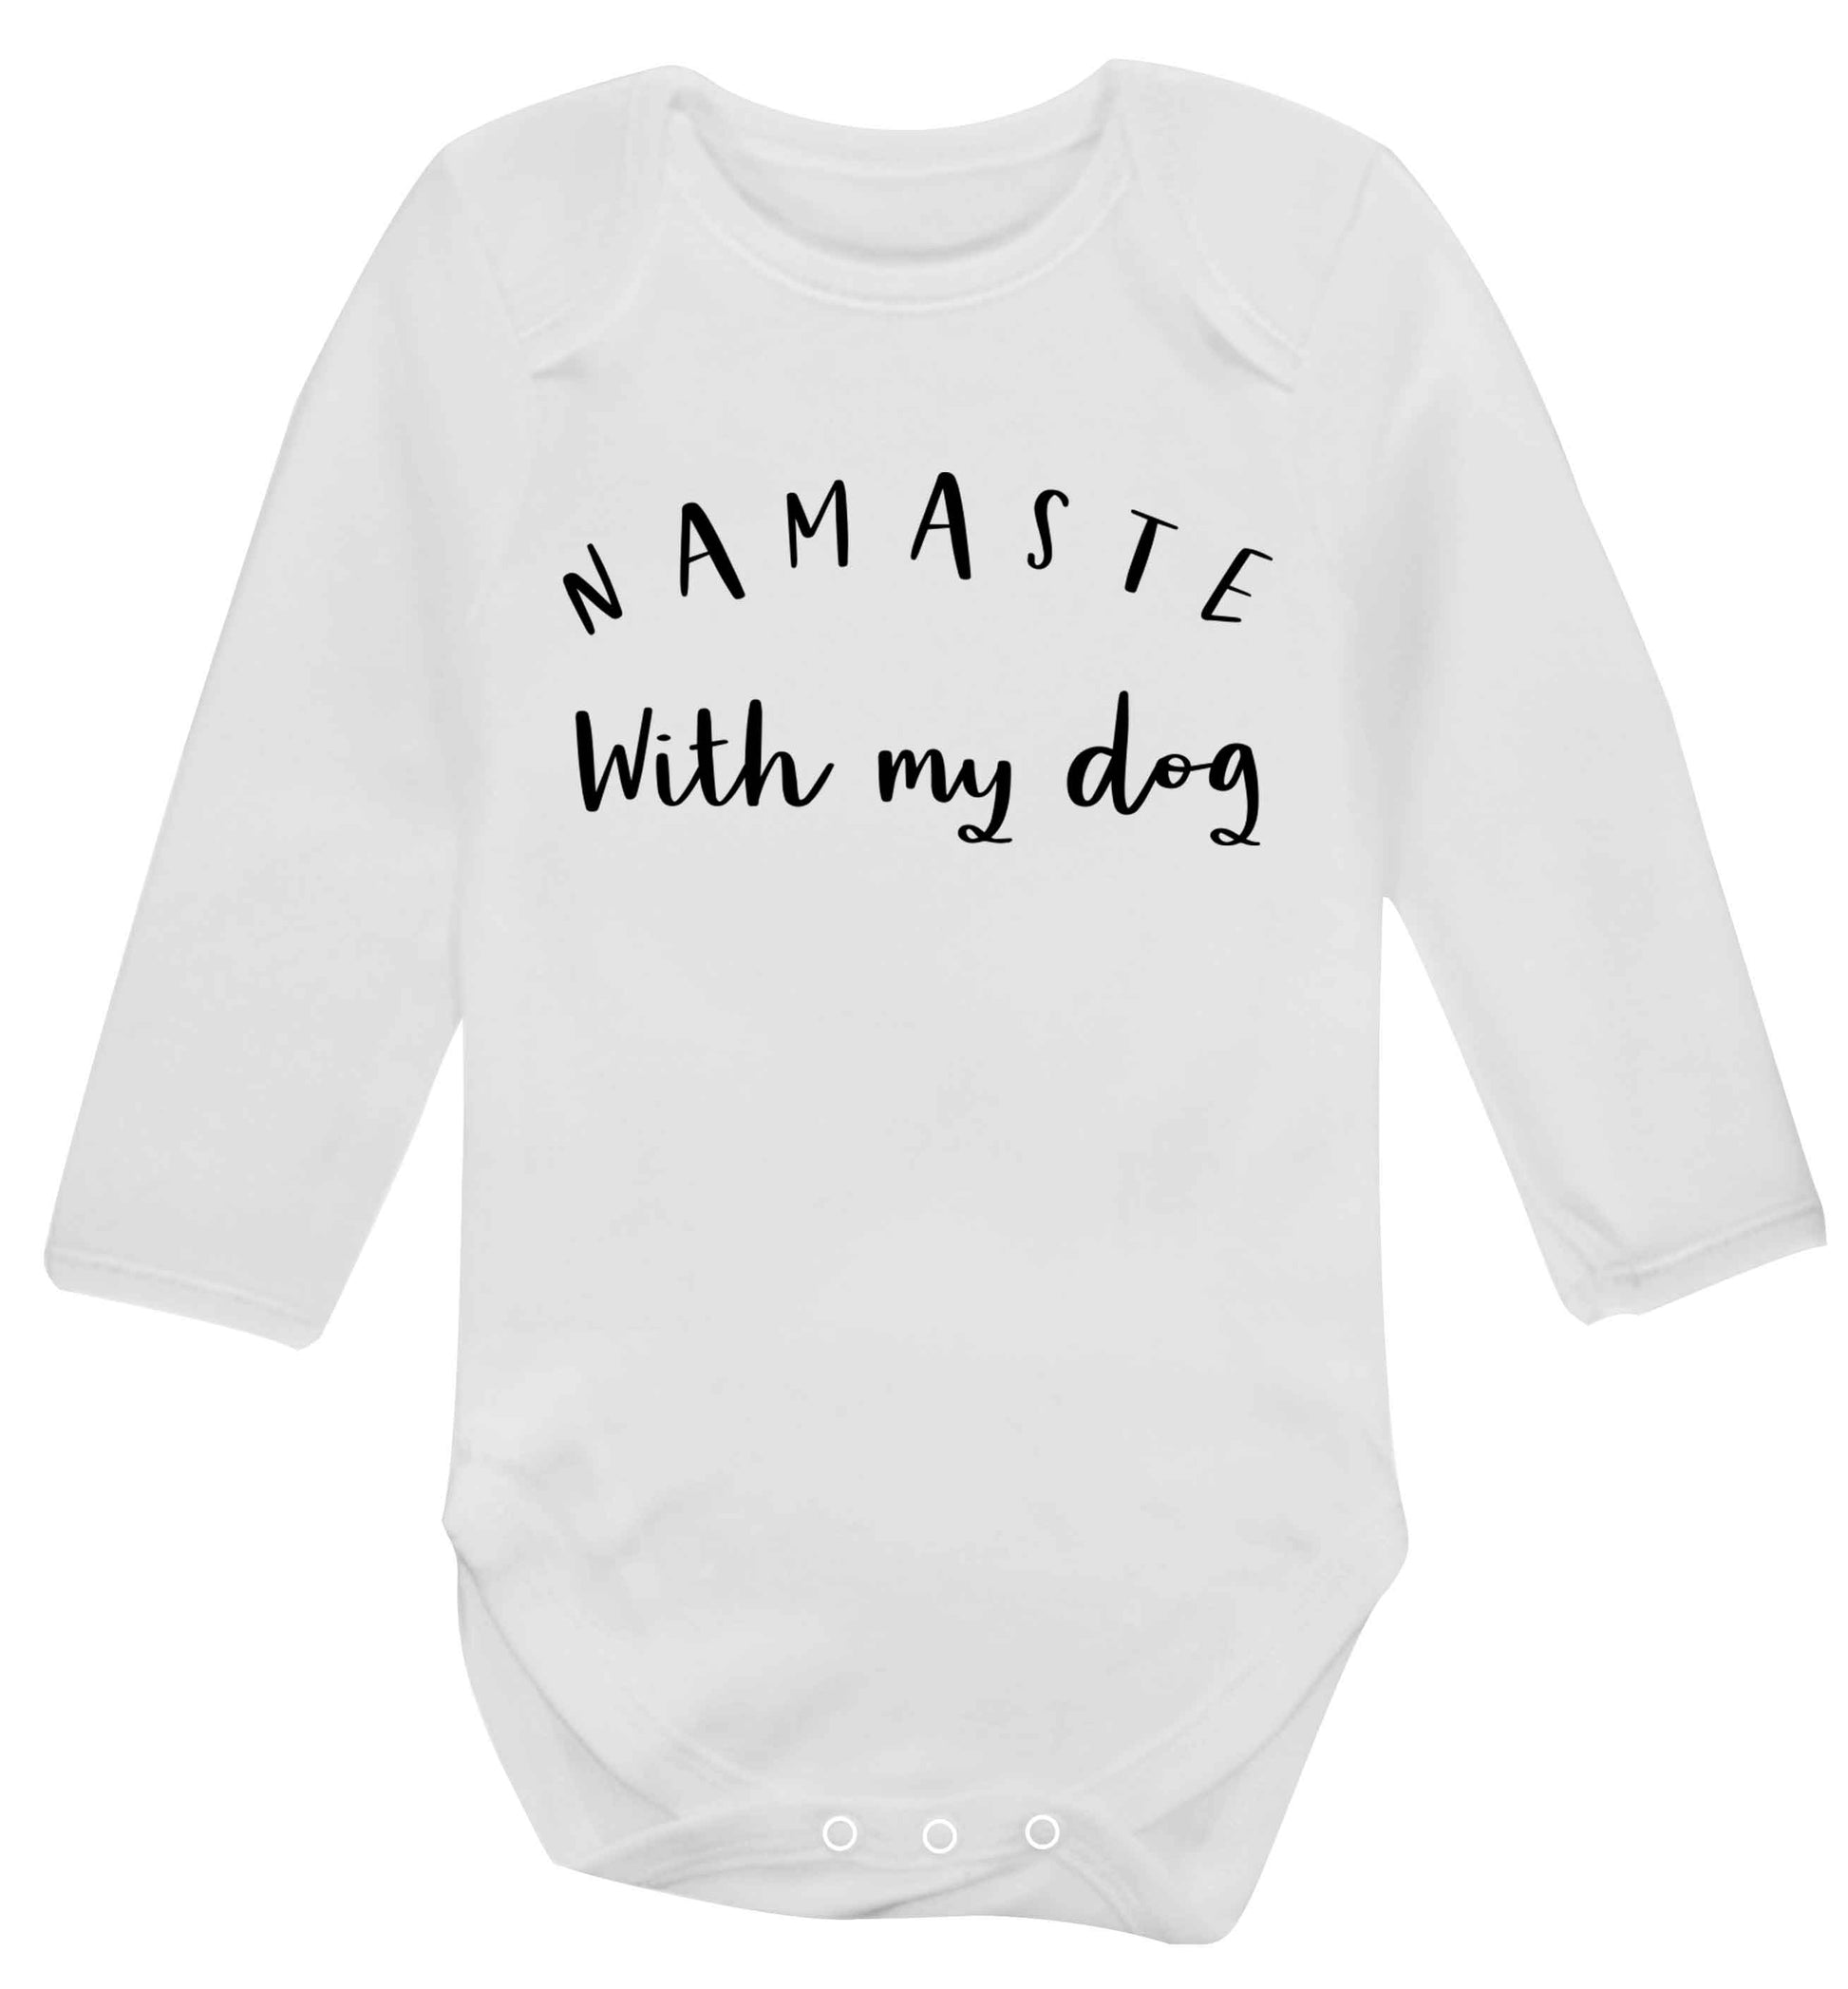 Namaste with my dog Baby Vest long sleeved white 6-12 months